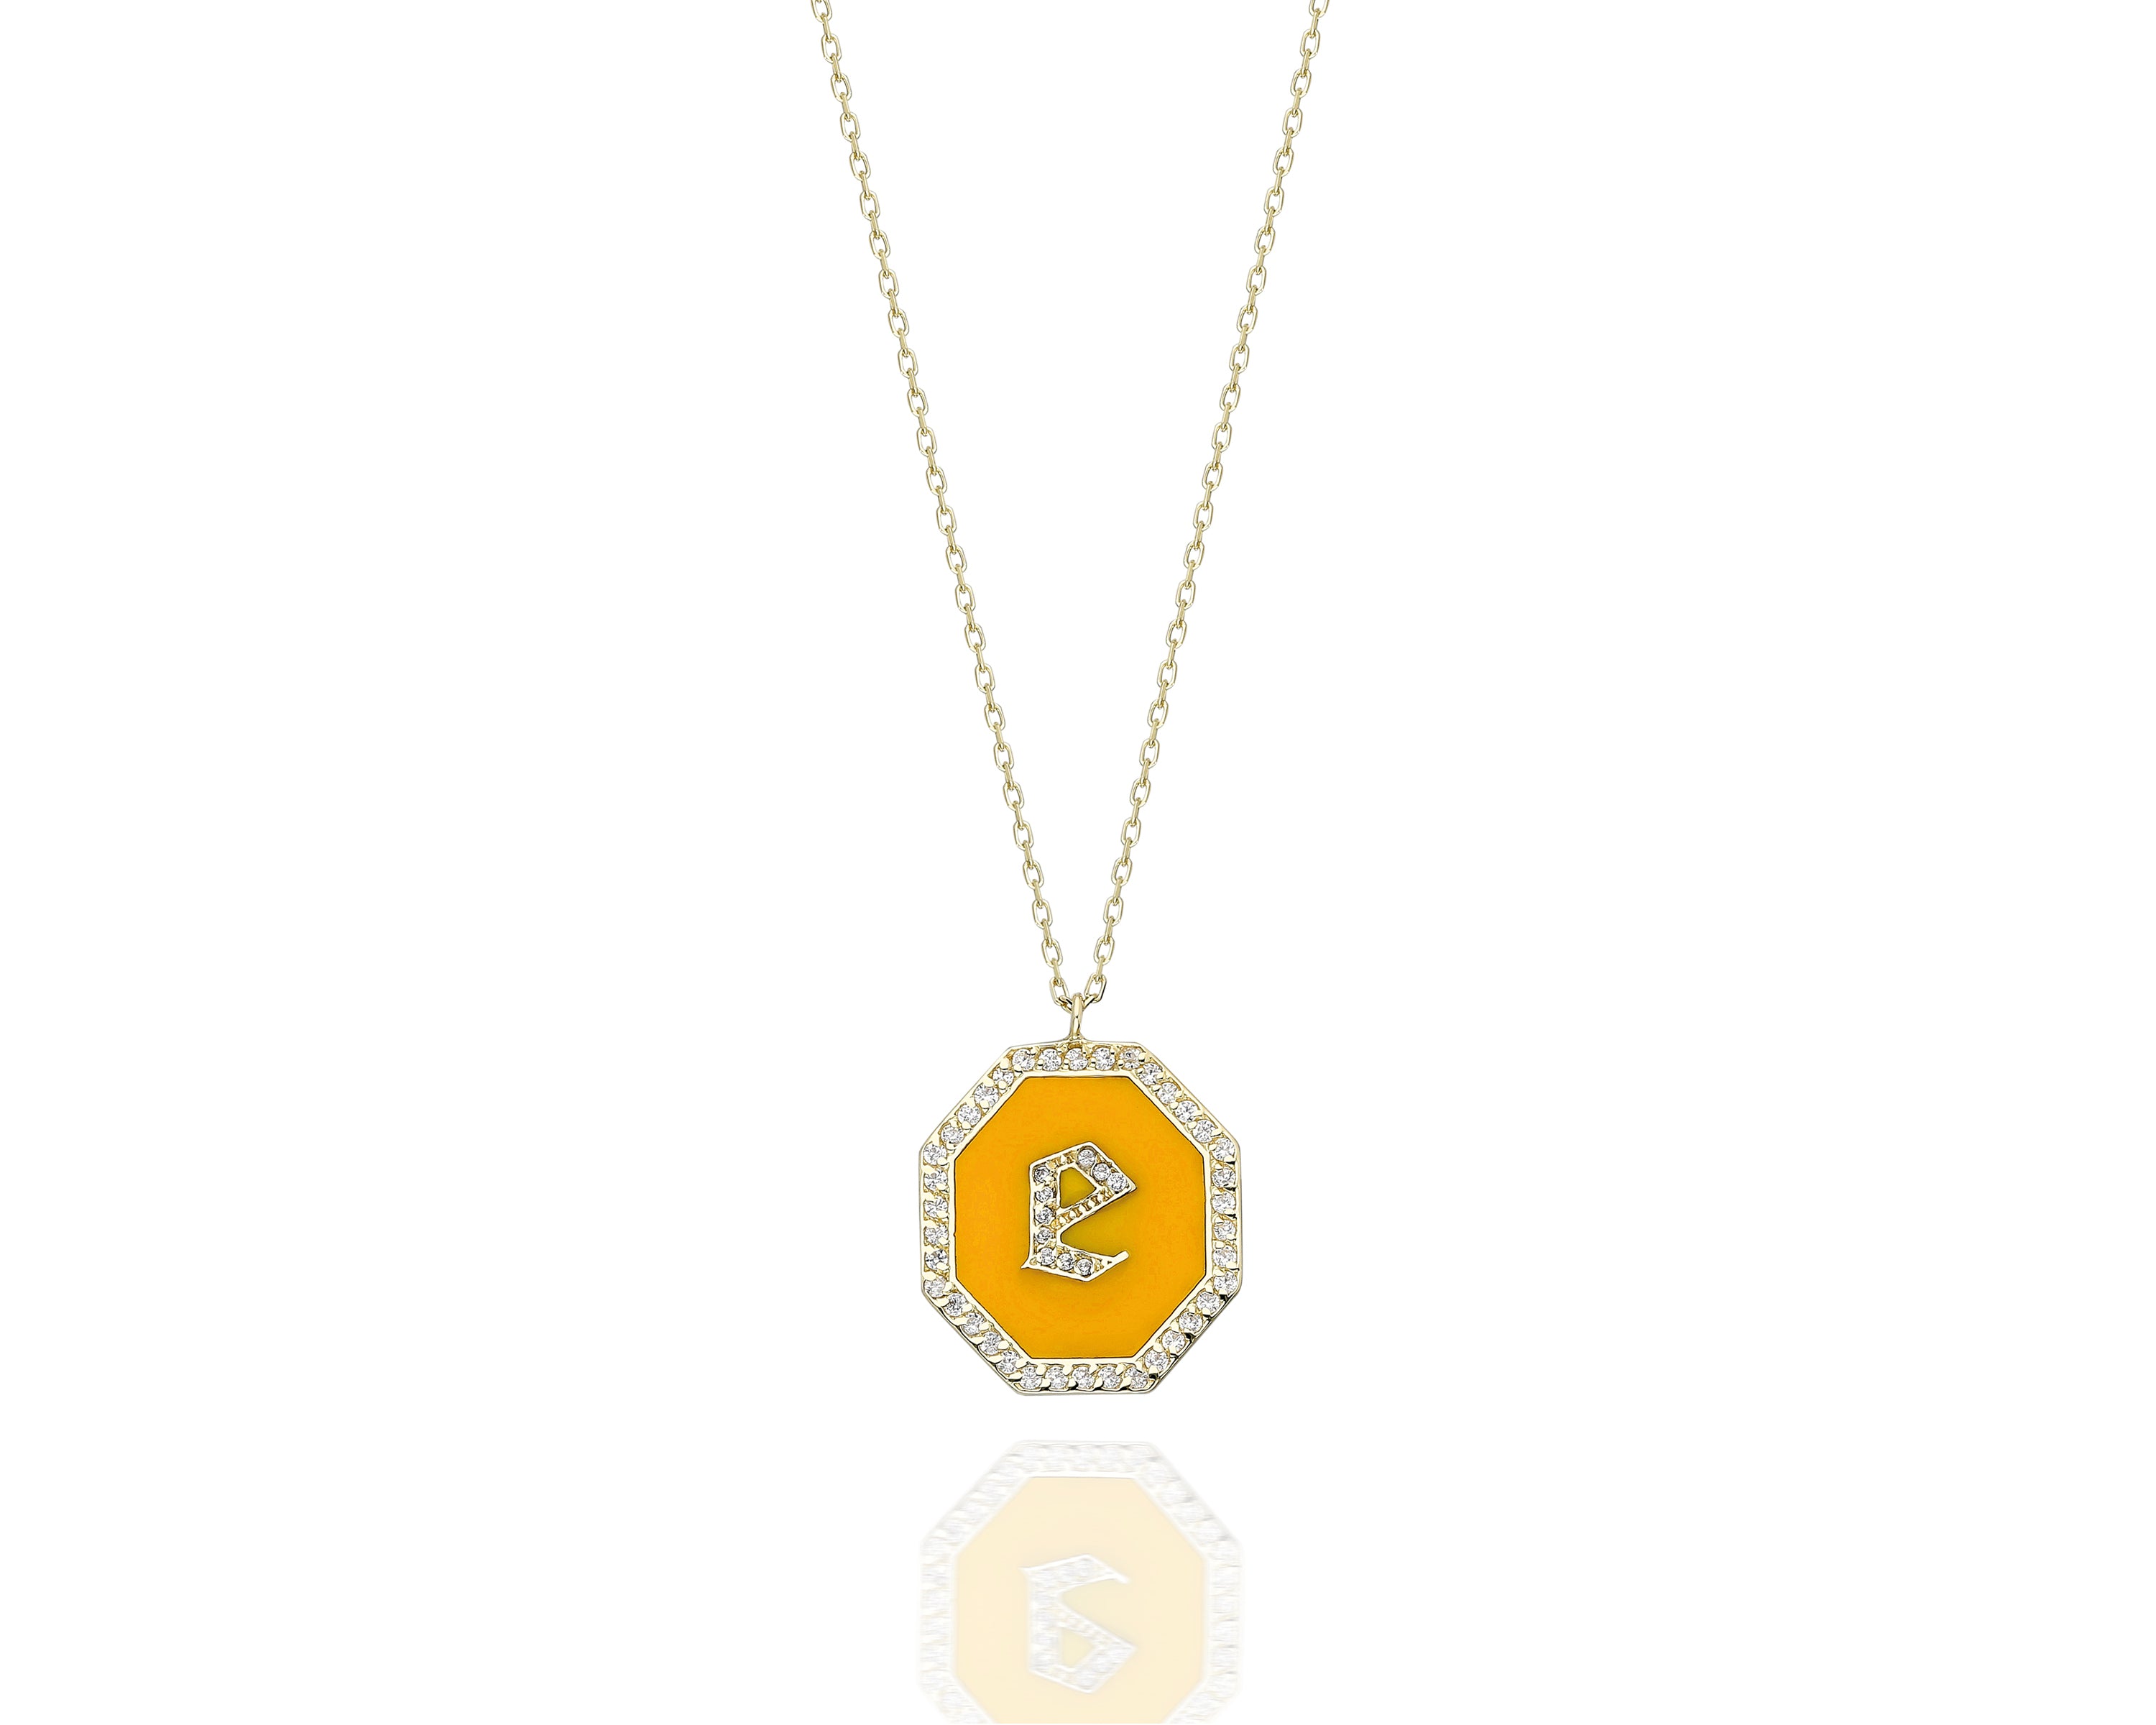 The Bellflower Enamel Letter Necklace with Stones